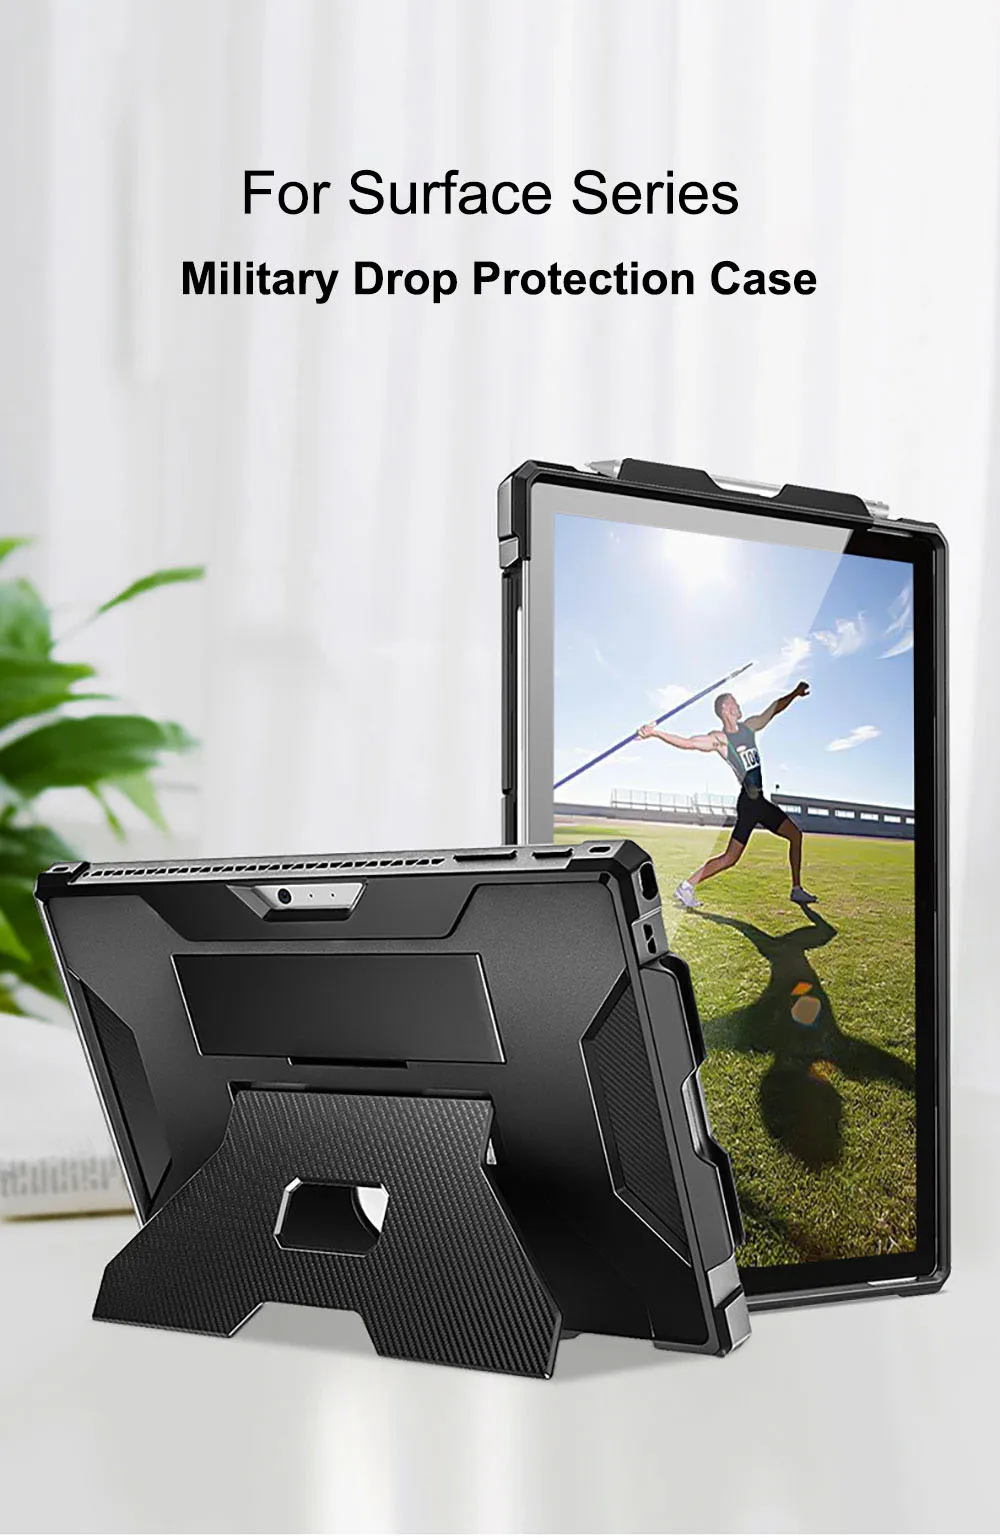 Business Tablet Cover For Microsoft Surface Pro 7 Plus 6 5 With Hand Grip Strap Holder Protective Case Anti Drop Pbk210 Laudtec details